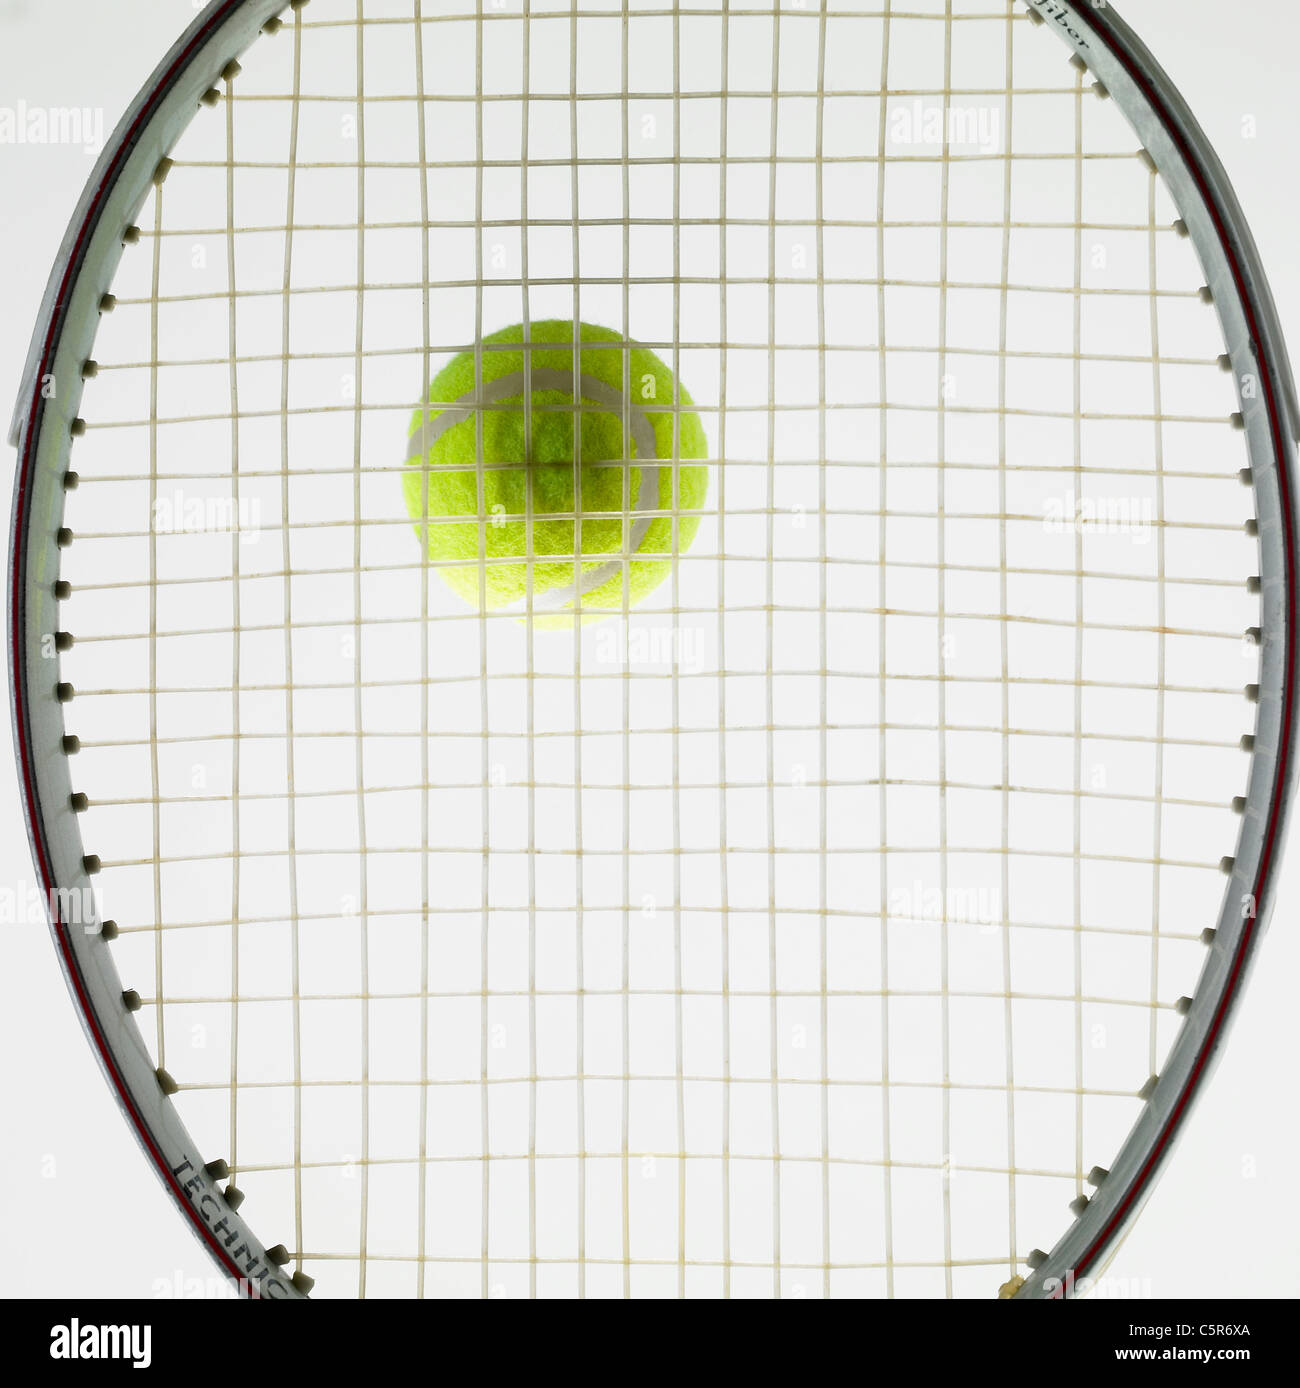 A tennis racket and a ball Stock Photo